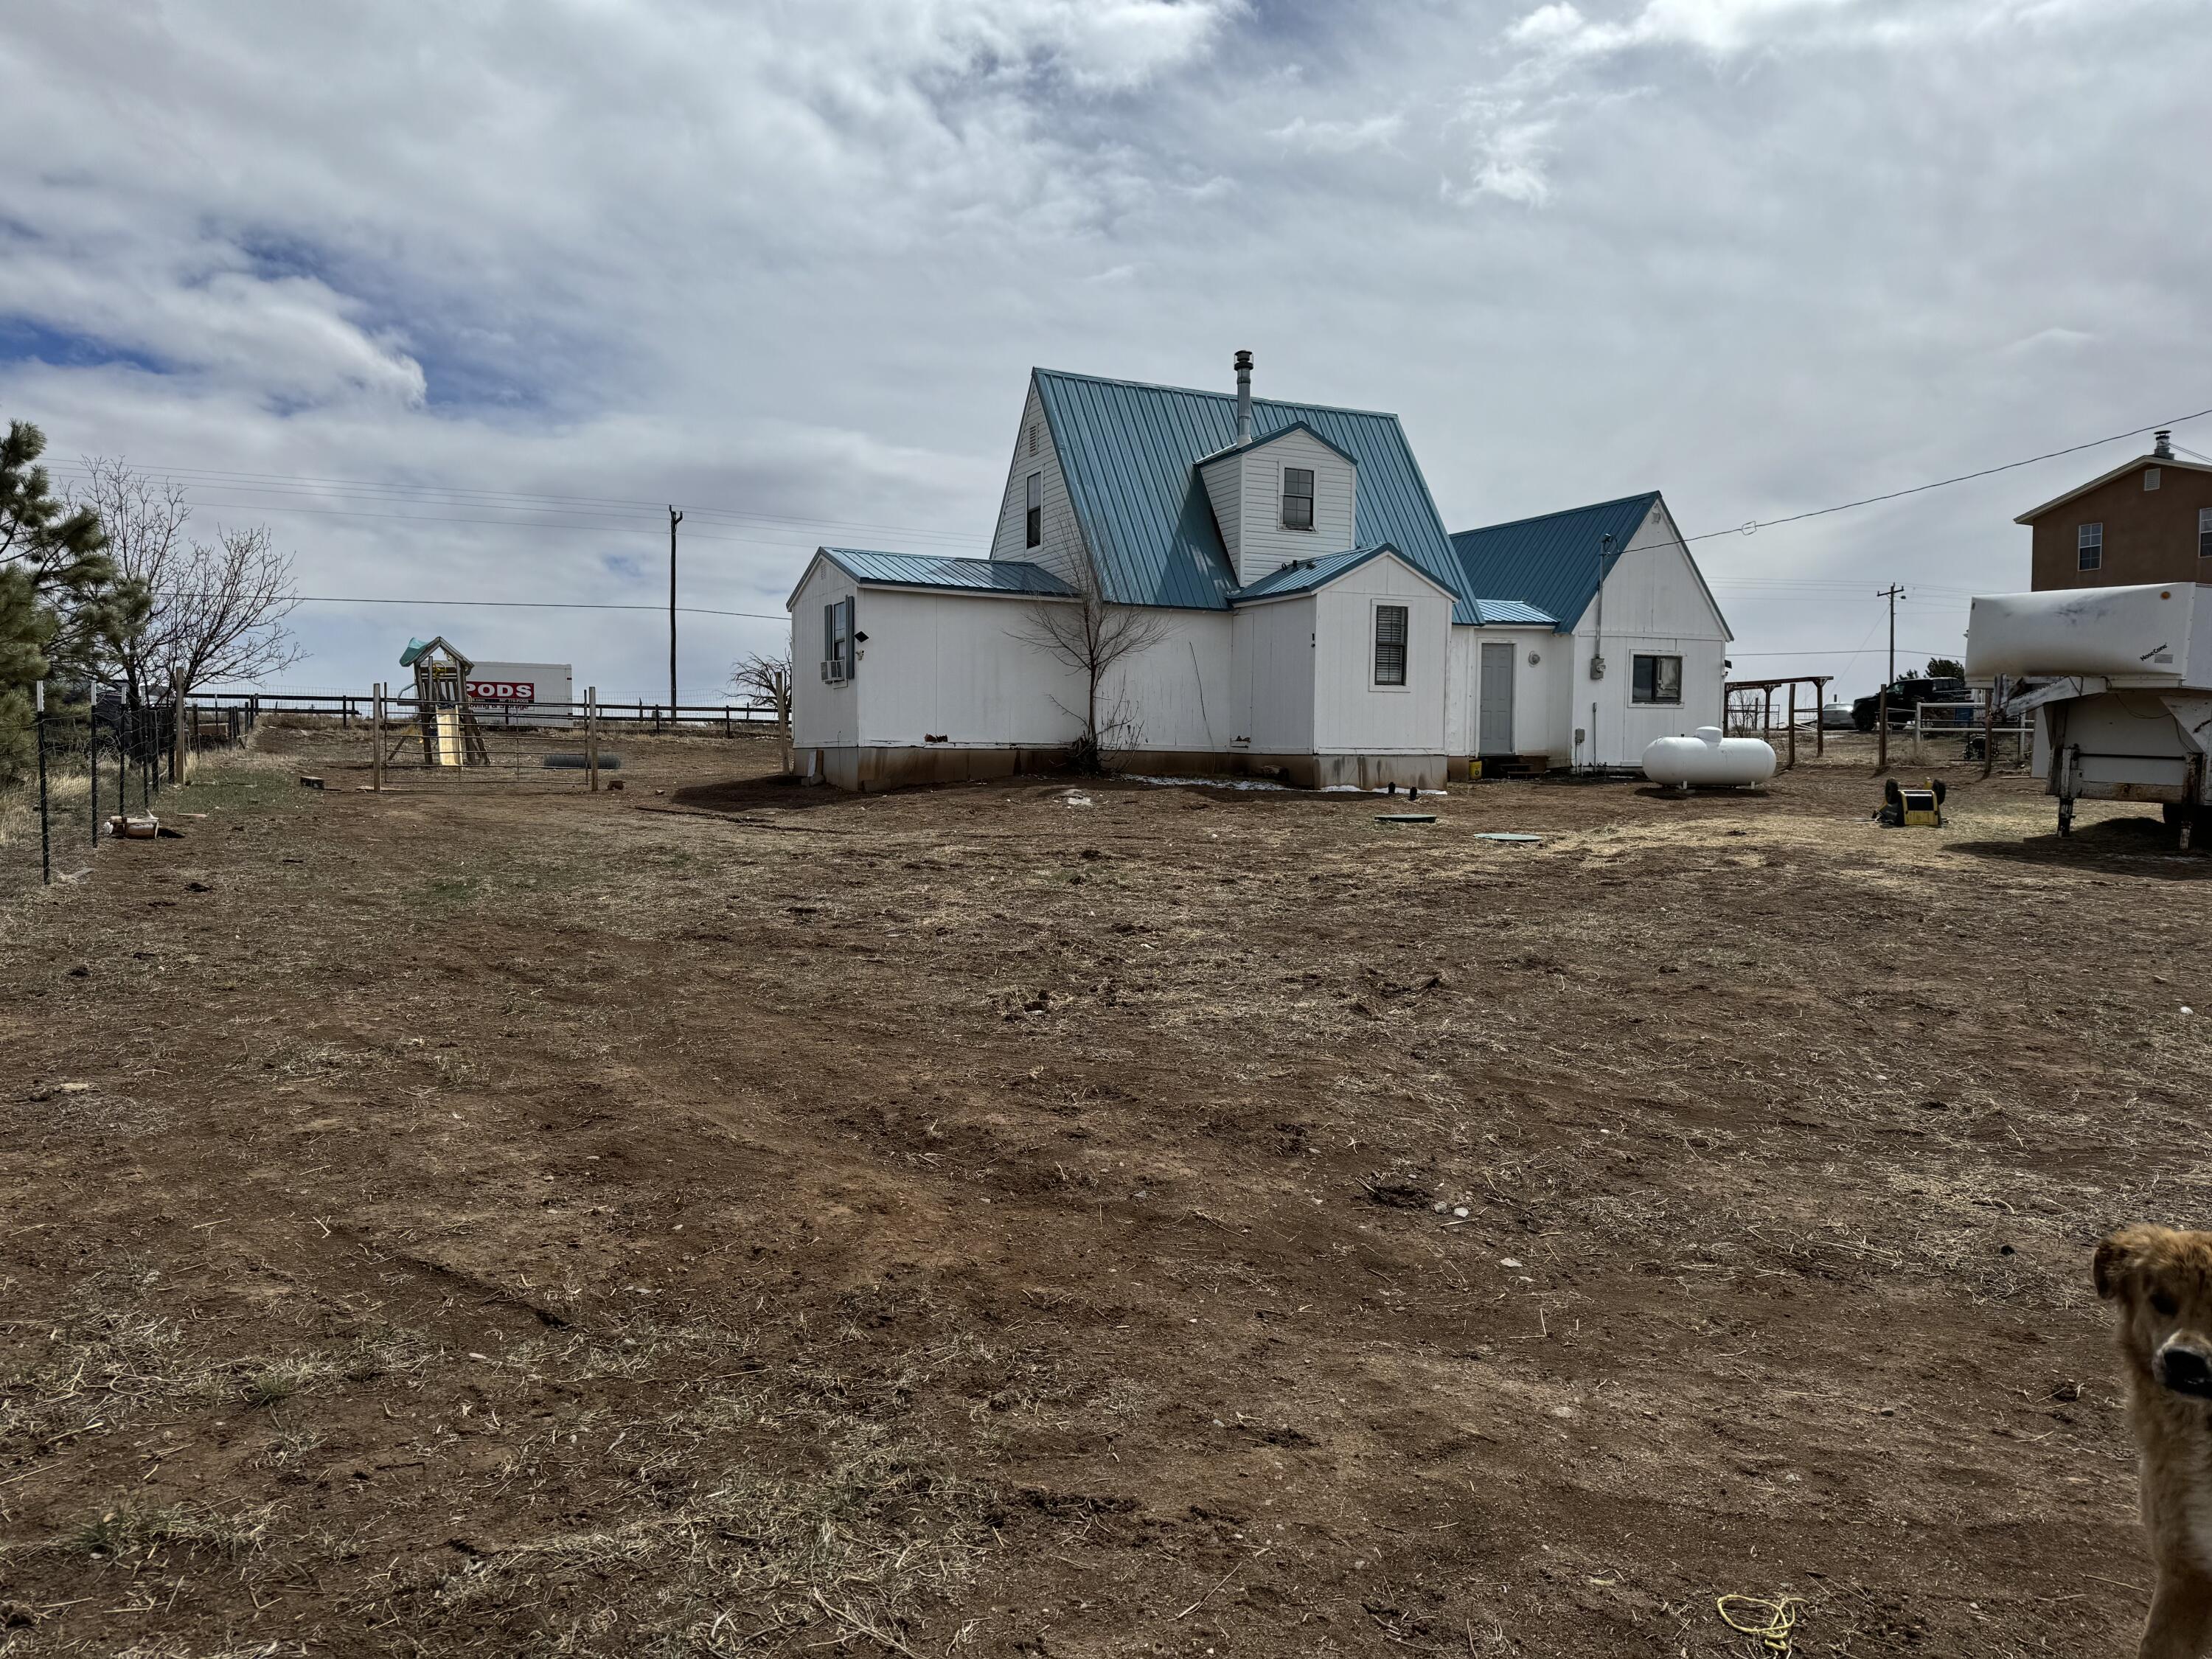 26 V Hill Road SE, Edgewood, New Mexico 87015, 2 Bedrooms Bedrooms, ,1 BathroomBathrooms,Residential,For Sale,26 V Hill Road SE,1059430